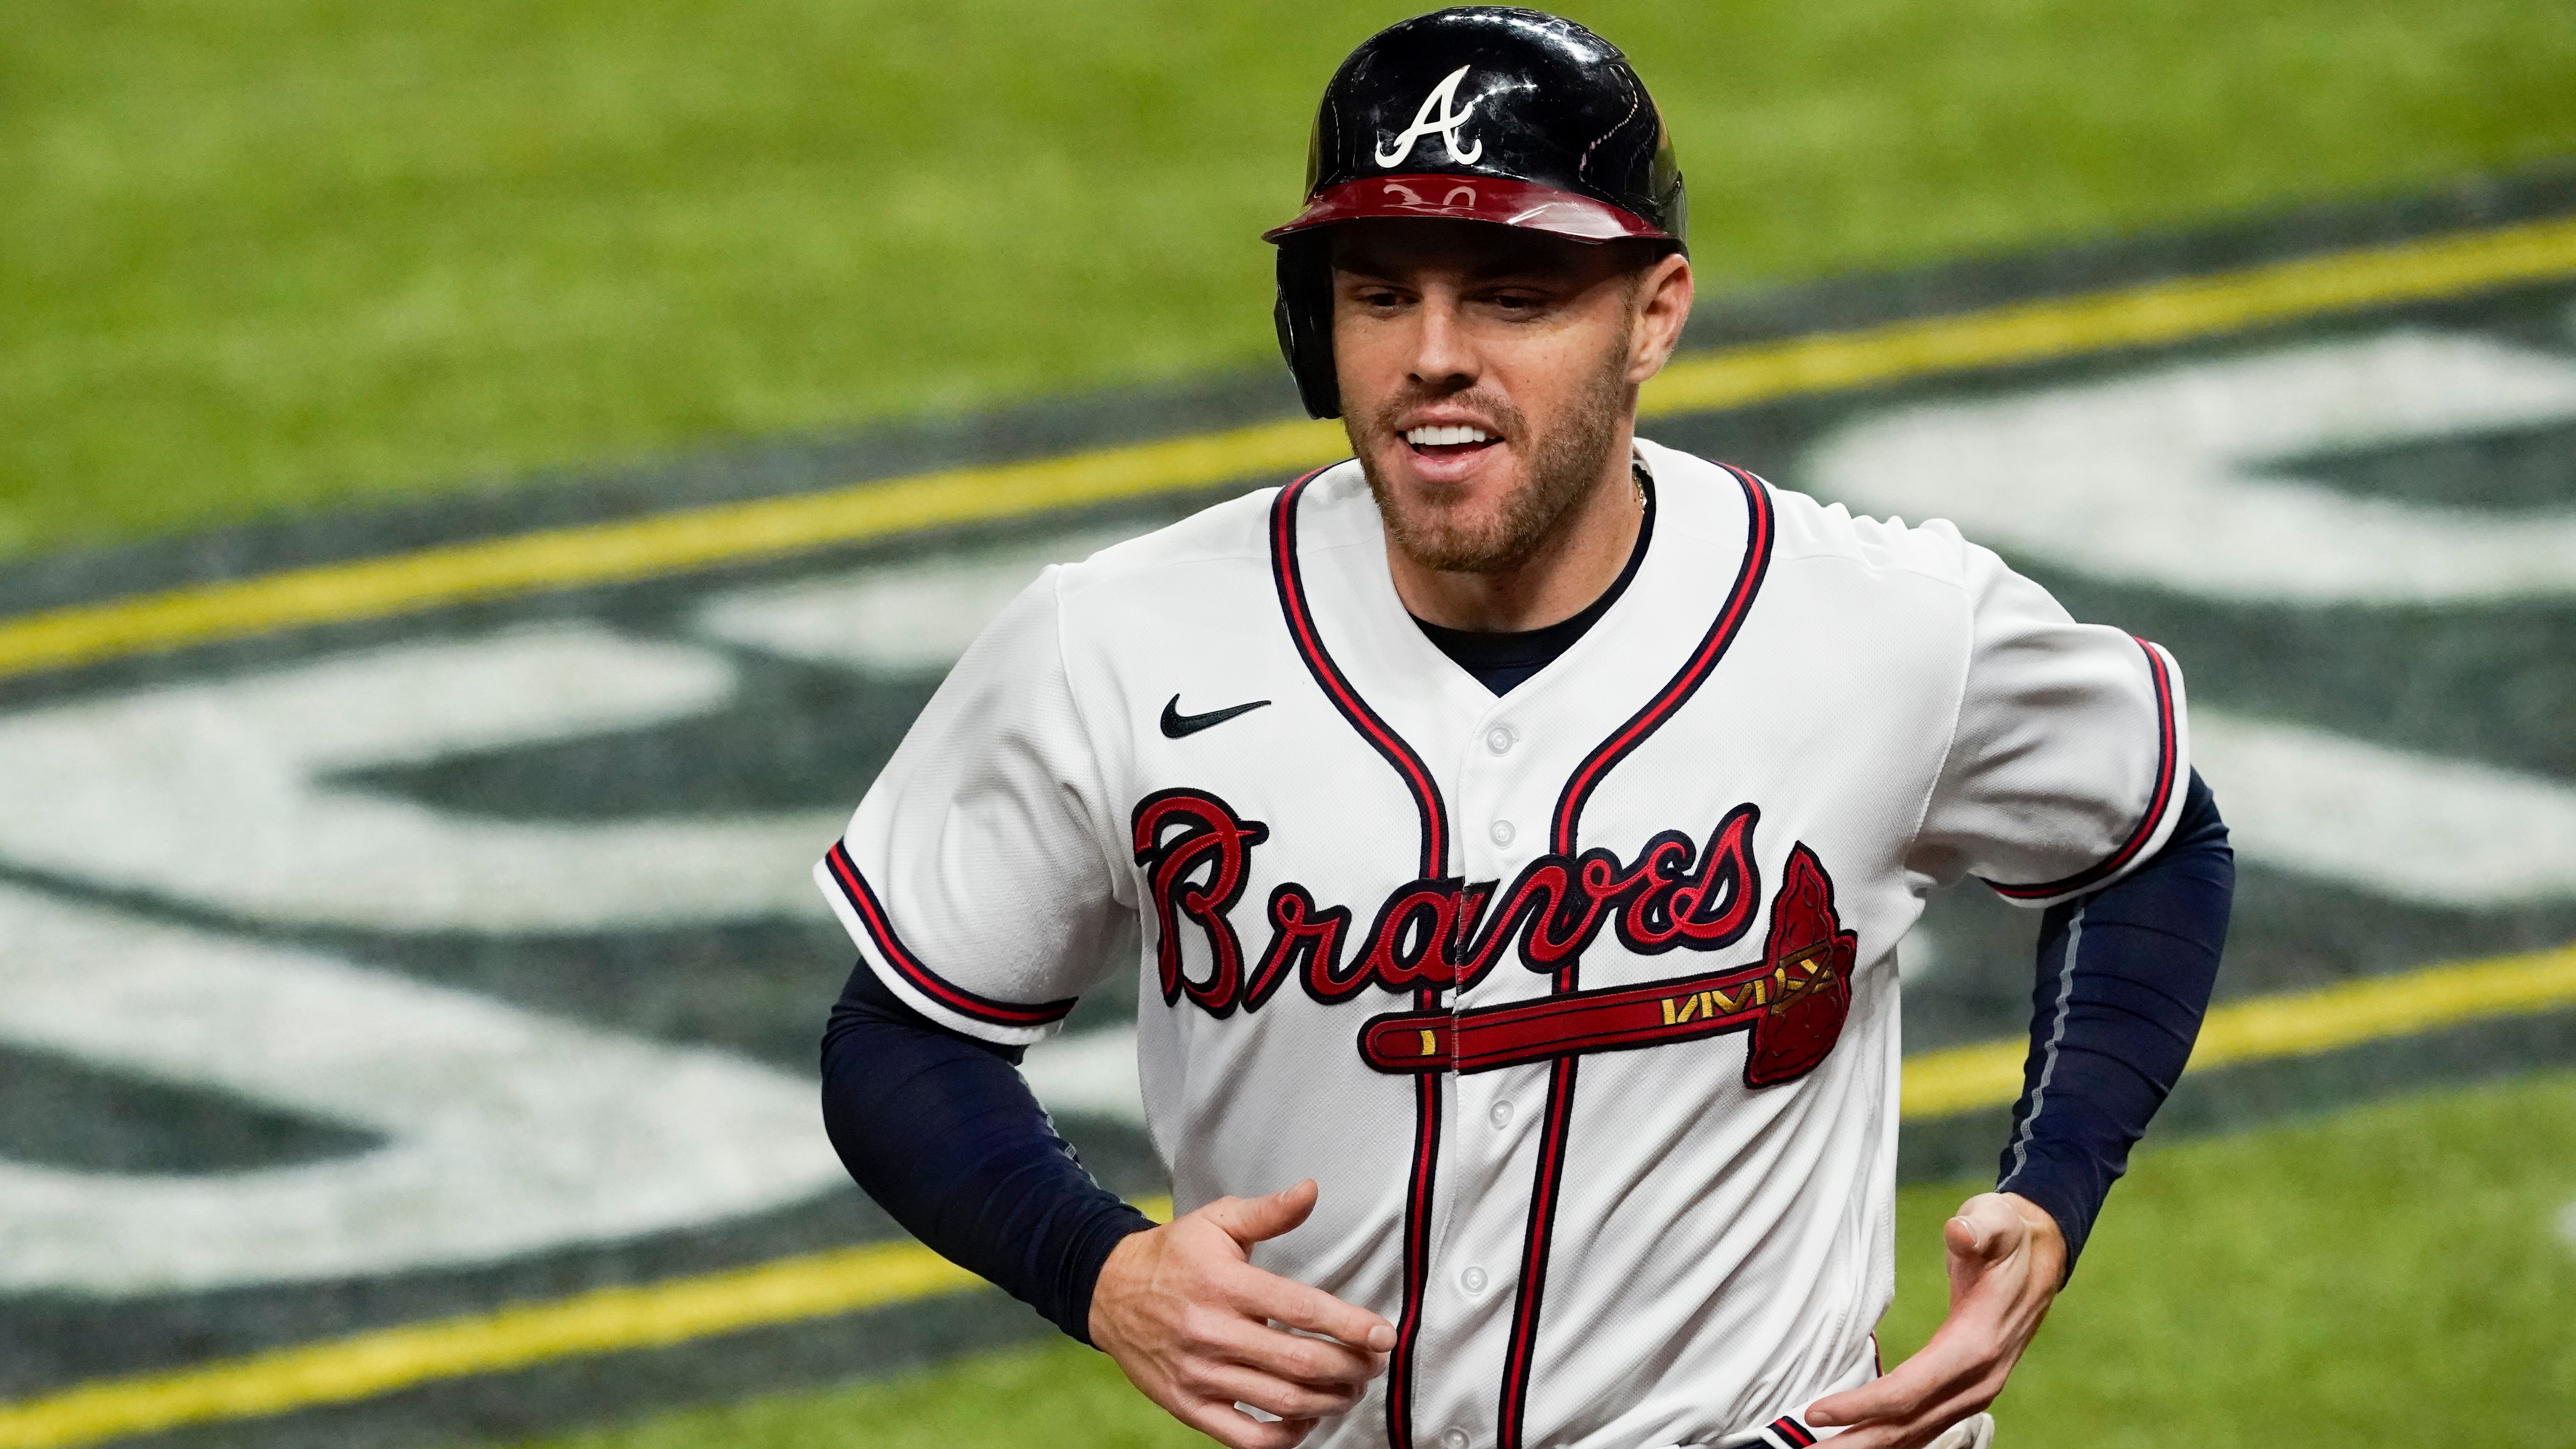 Freddie Freeman with the Rays? If you're going to dream, then dream big